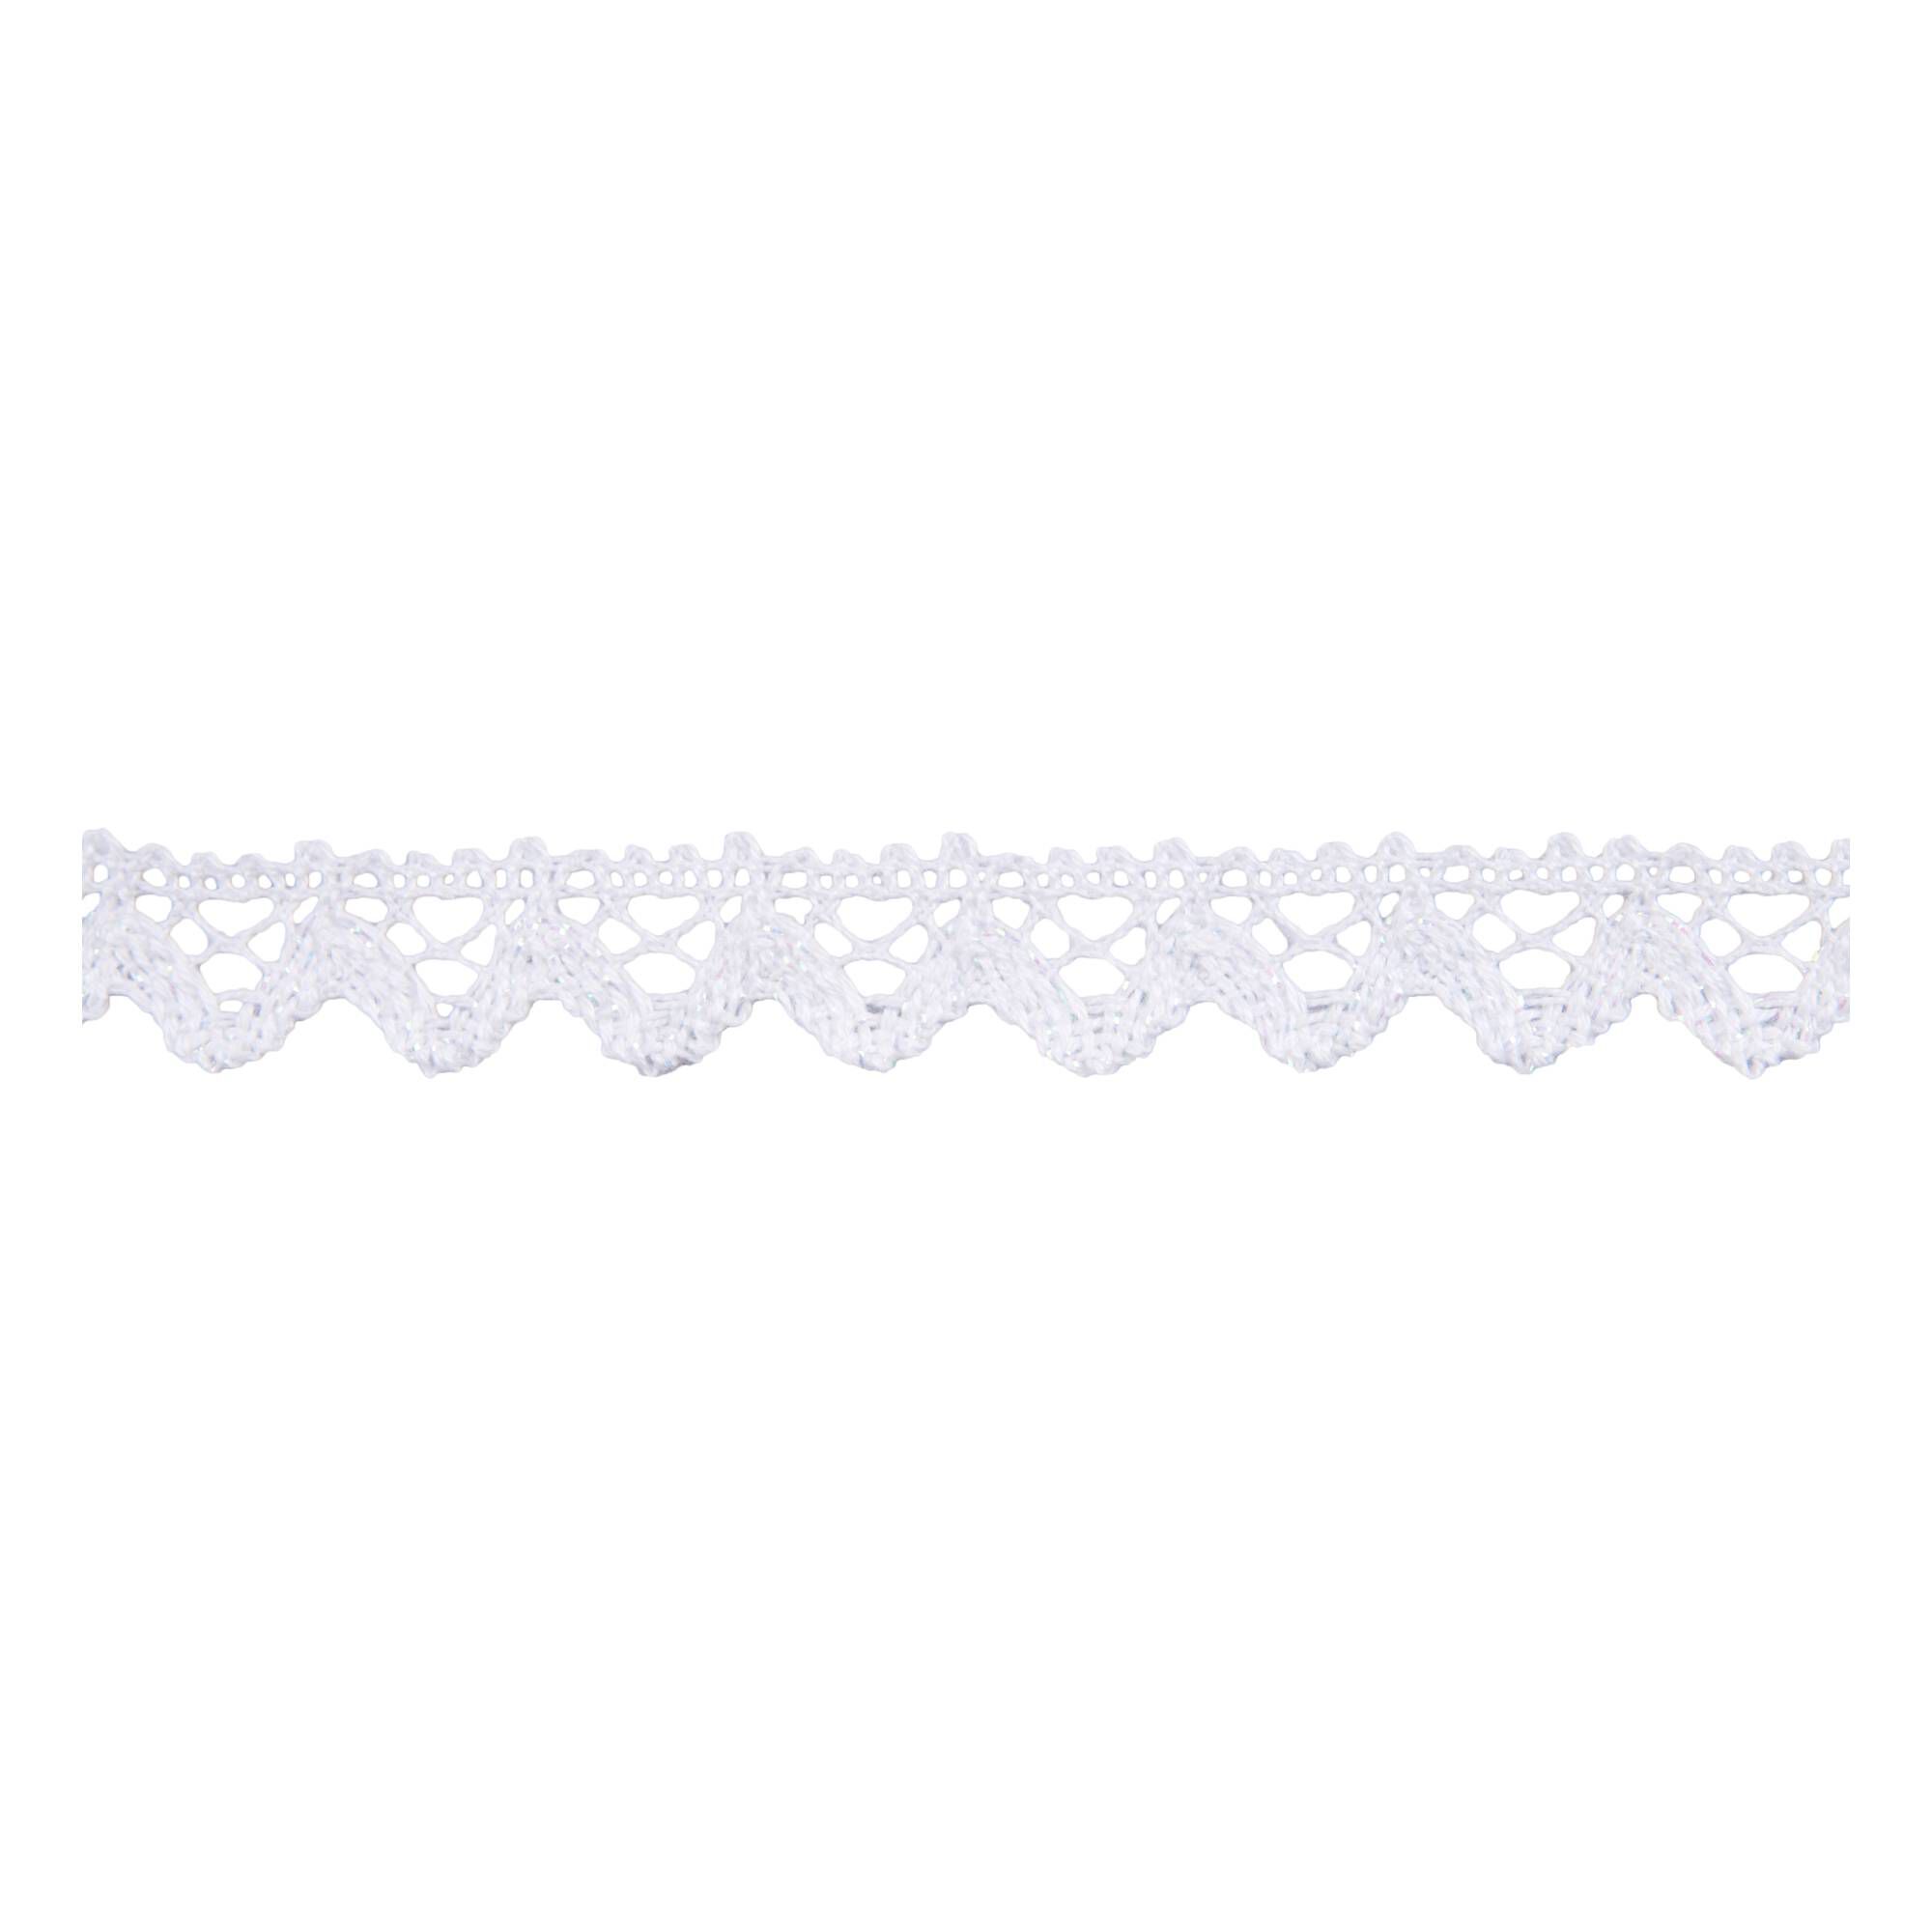 White Iridescent 16mm Metallic Lace Trim by the Metre | Hobbycraft